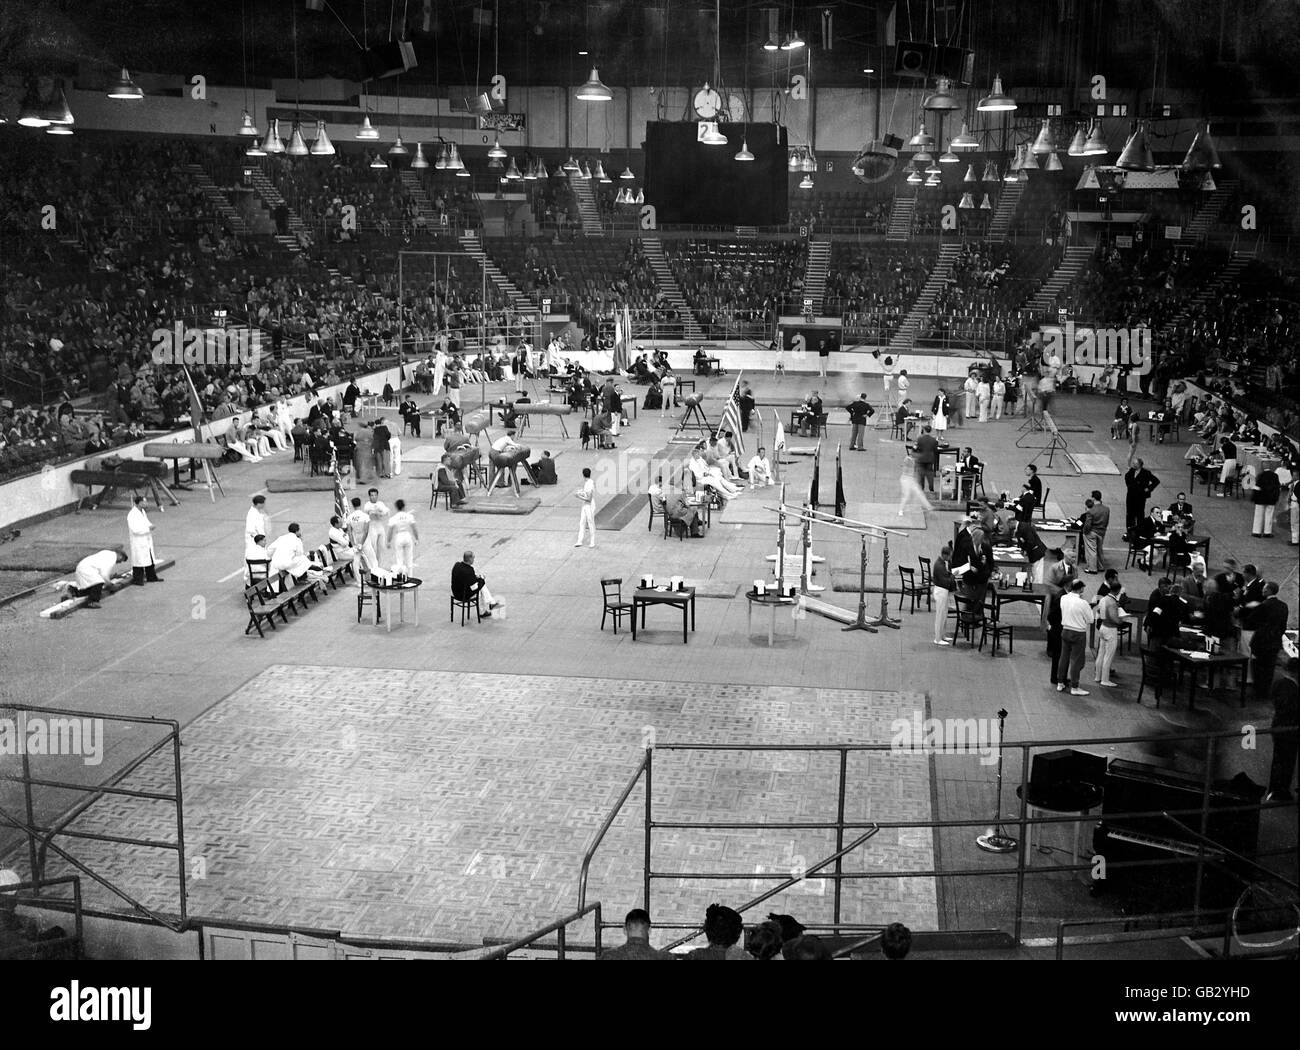 Gymnastics - London Olympic Games. General view of Earl's Court arena as the gymnastics events take place Stock Photo